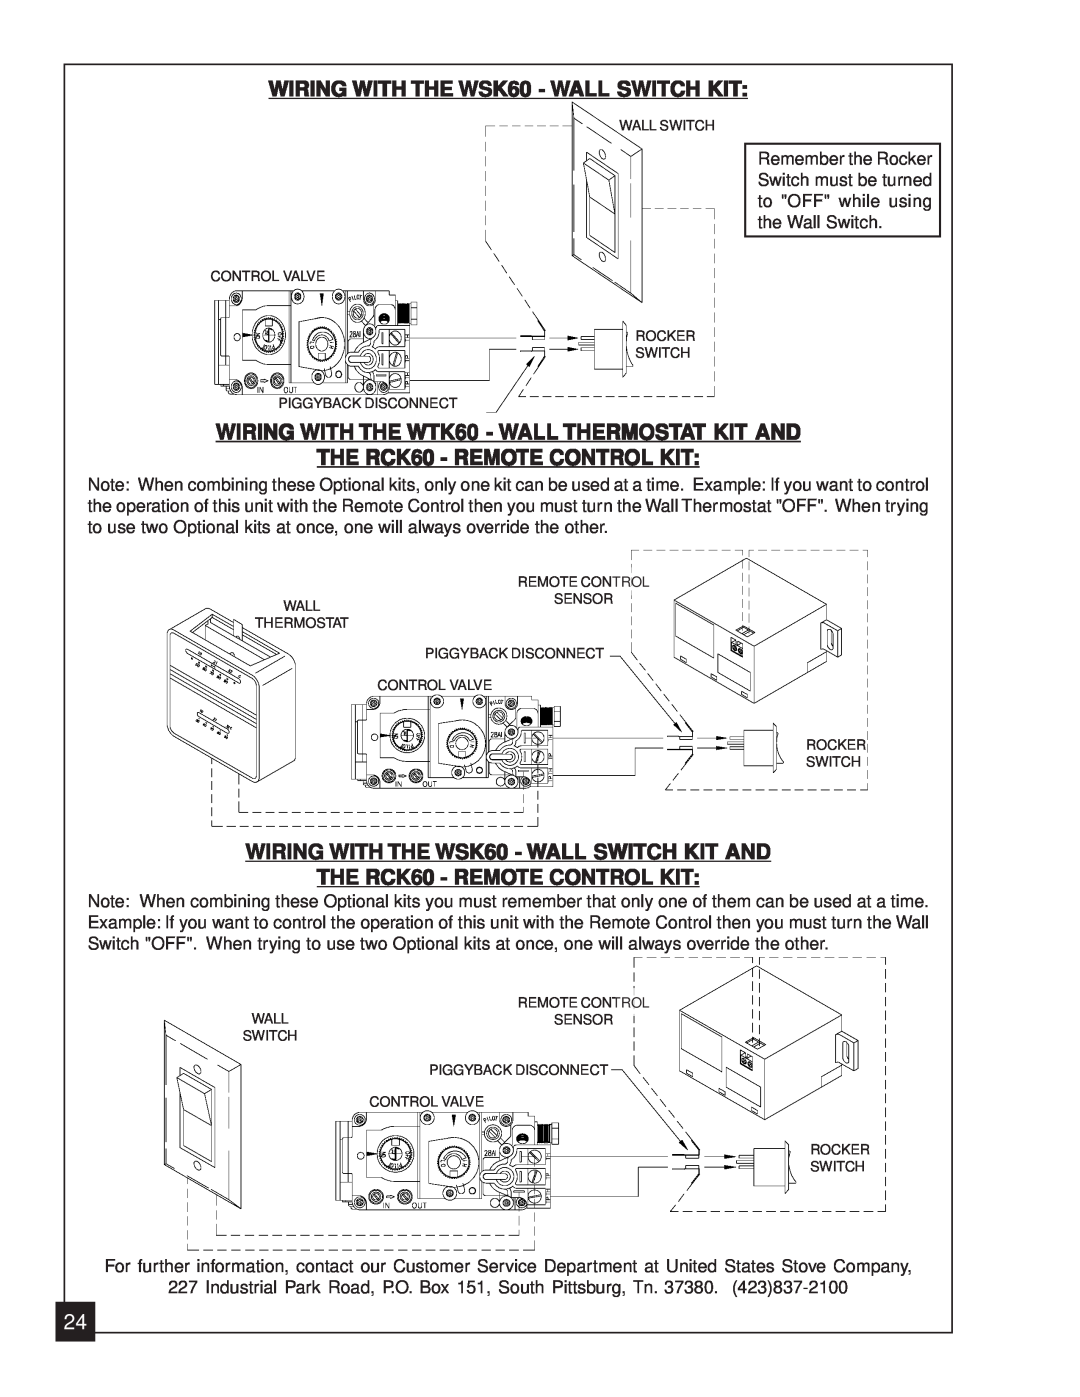 United States Stove 2020N manual WIRING WITH THE WSK60 - WALL SWITCH KIT, WIRING WITH THE WTK60 - WALL THERMOSTAT KIT AND 